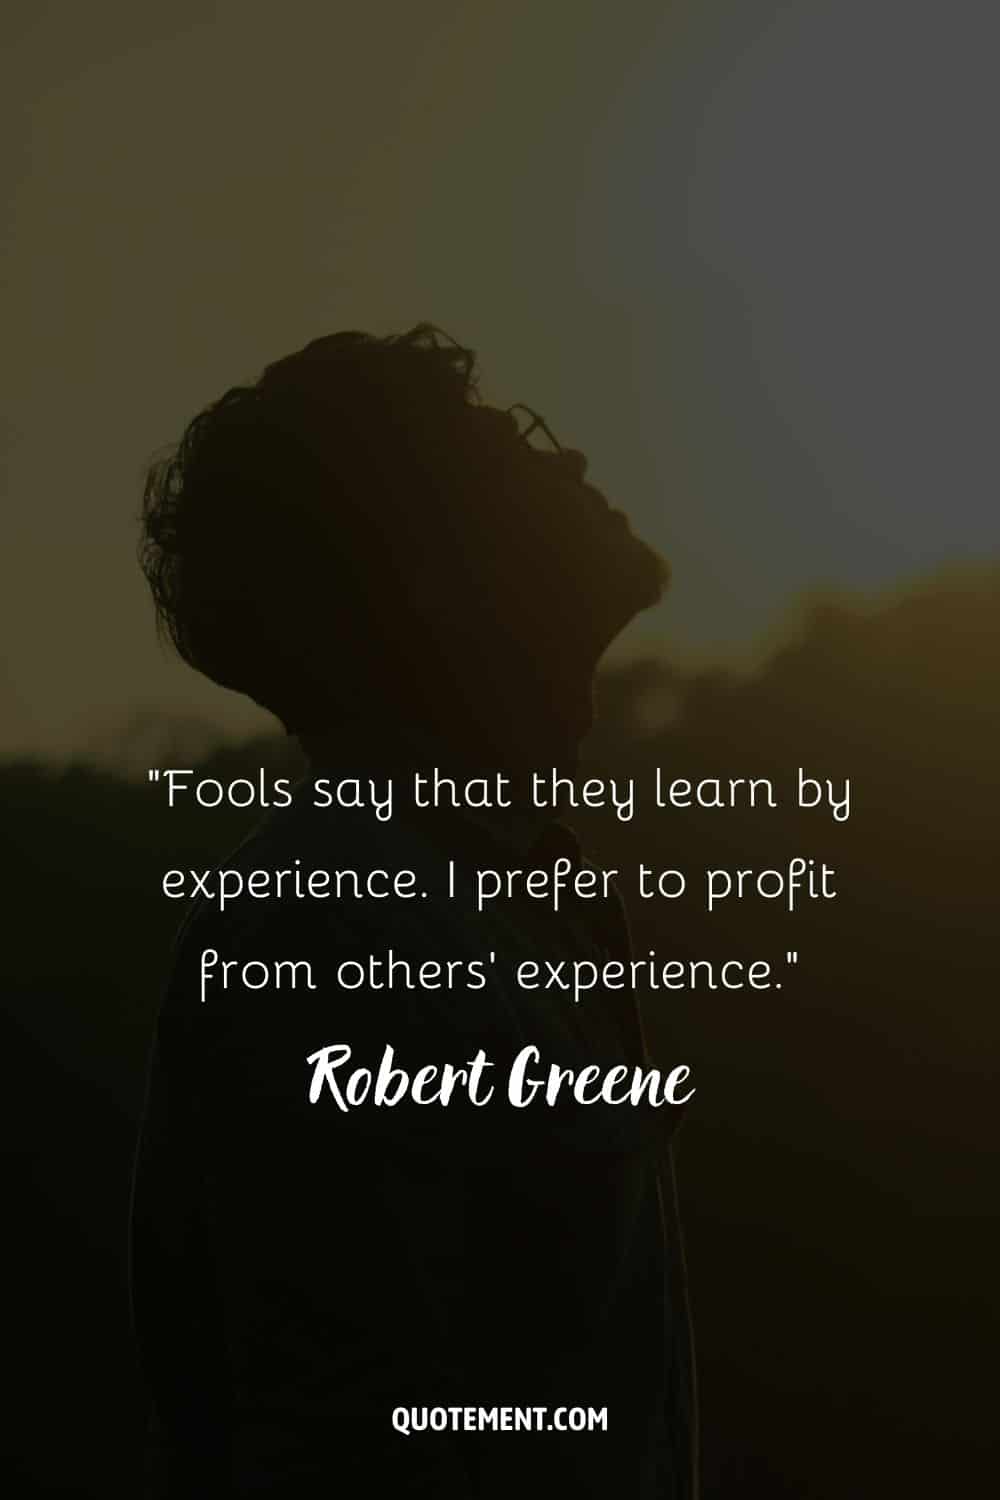 “Fools say that they learn by experience. I prefer to profit from others' experience.” ― Robert Greene, The 48 Laws of Power